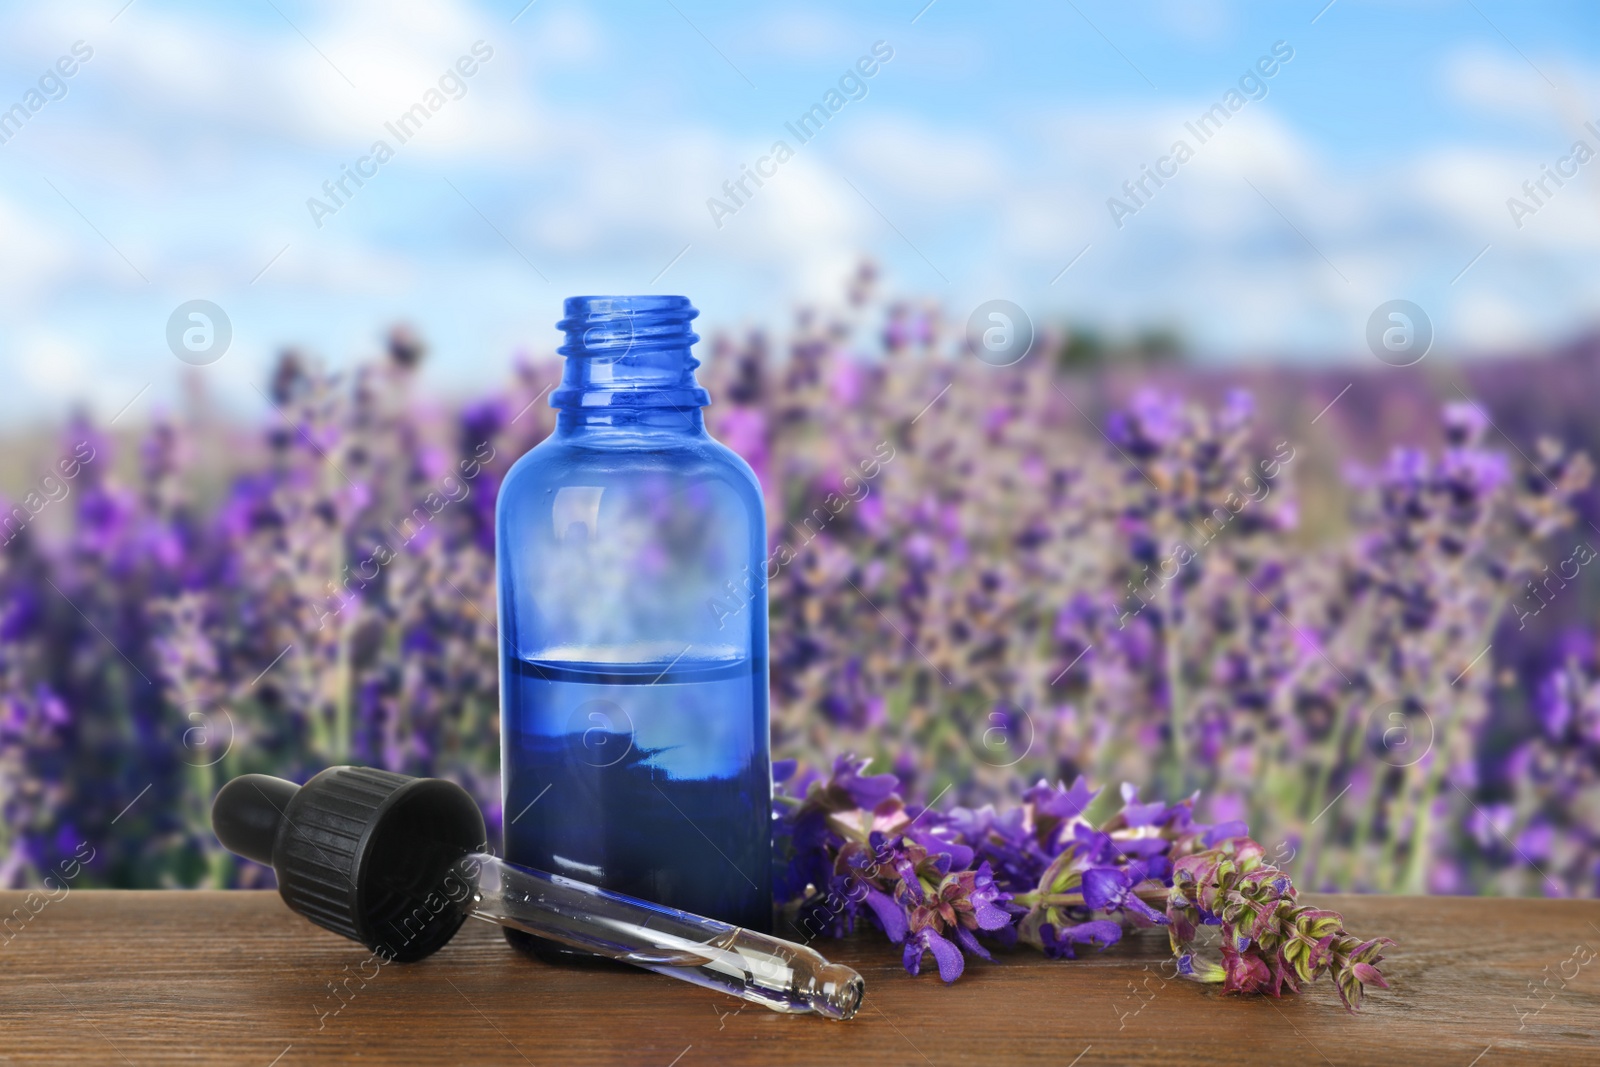 Image of Bottle of essential oil and sage flowers on wooden table against blurred background